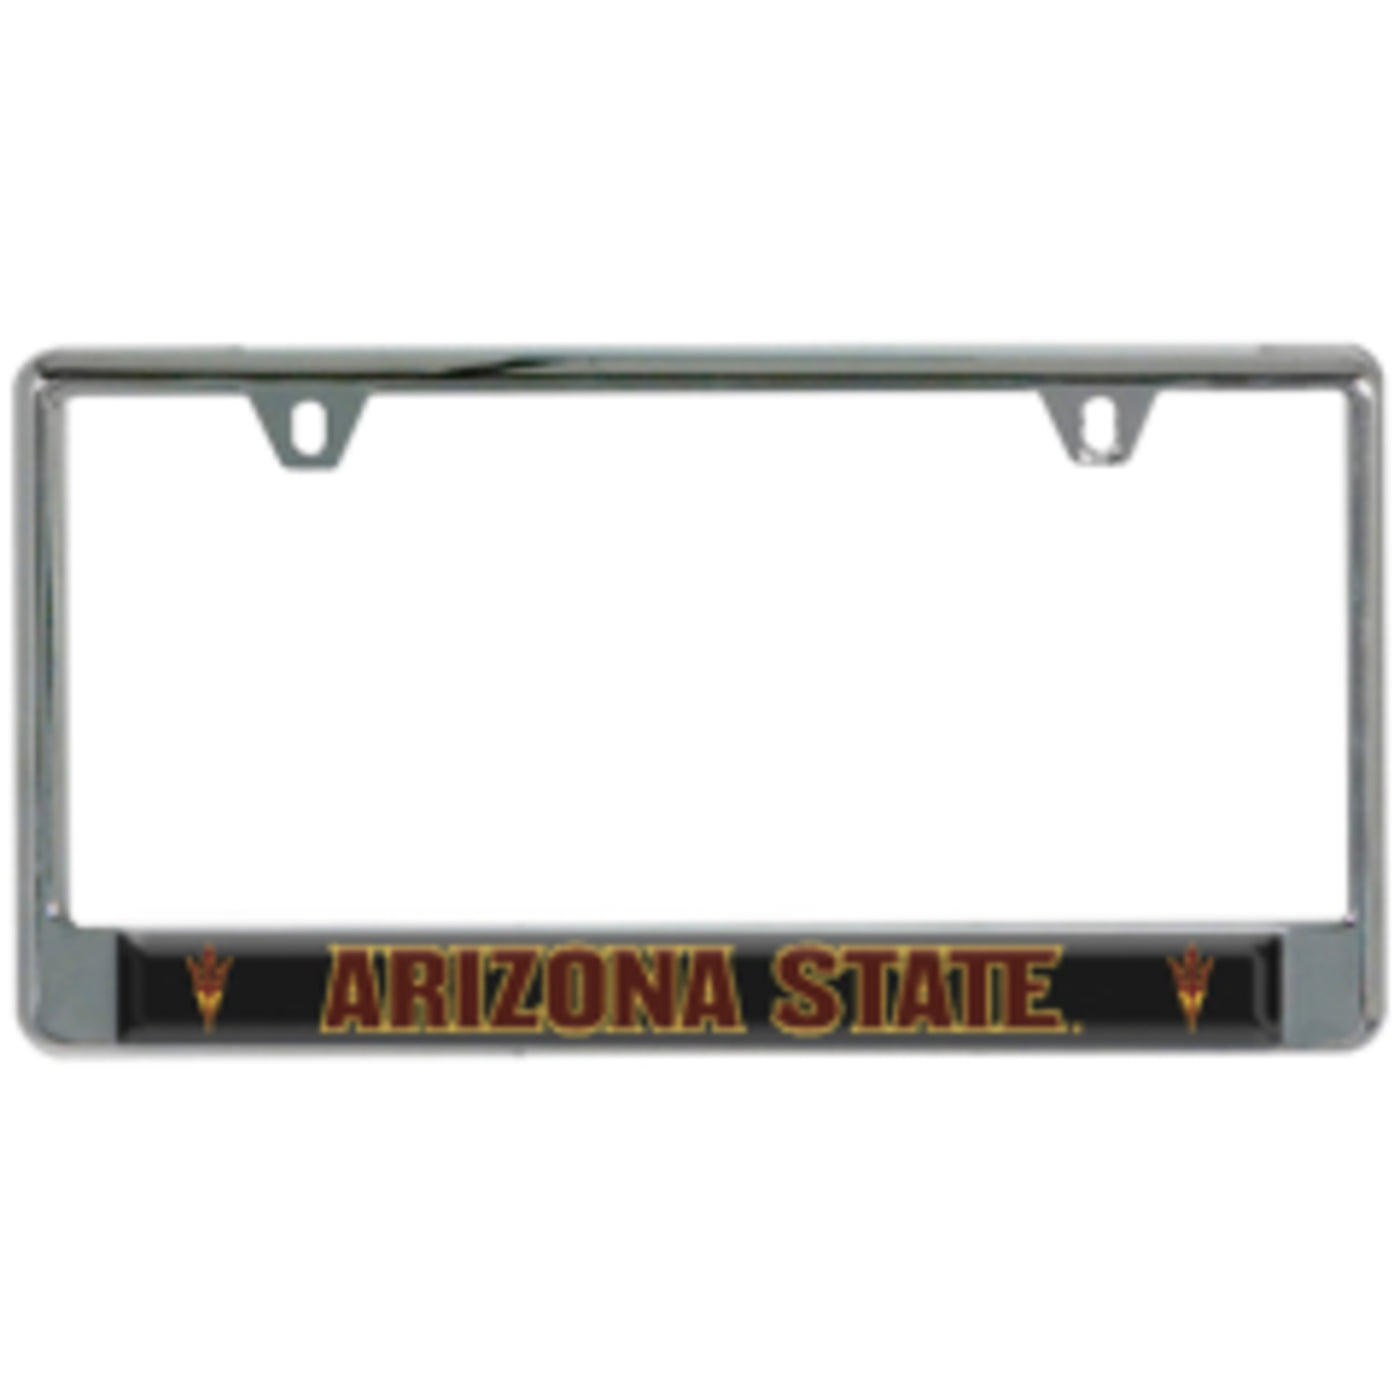 ASU silver license plate frame with black section on bottom. Overlapping black section is two small ptichfork logos in maroon outlined in gold and the text in between them 